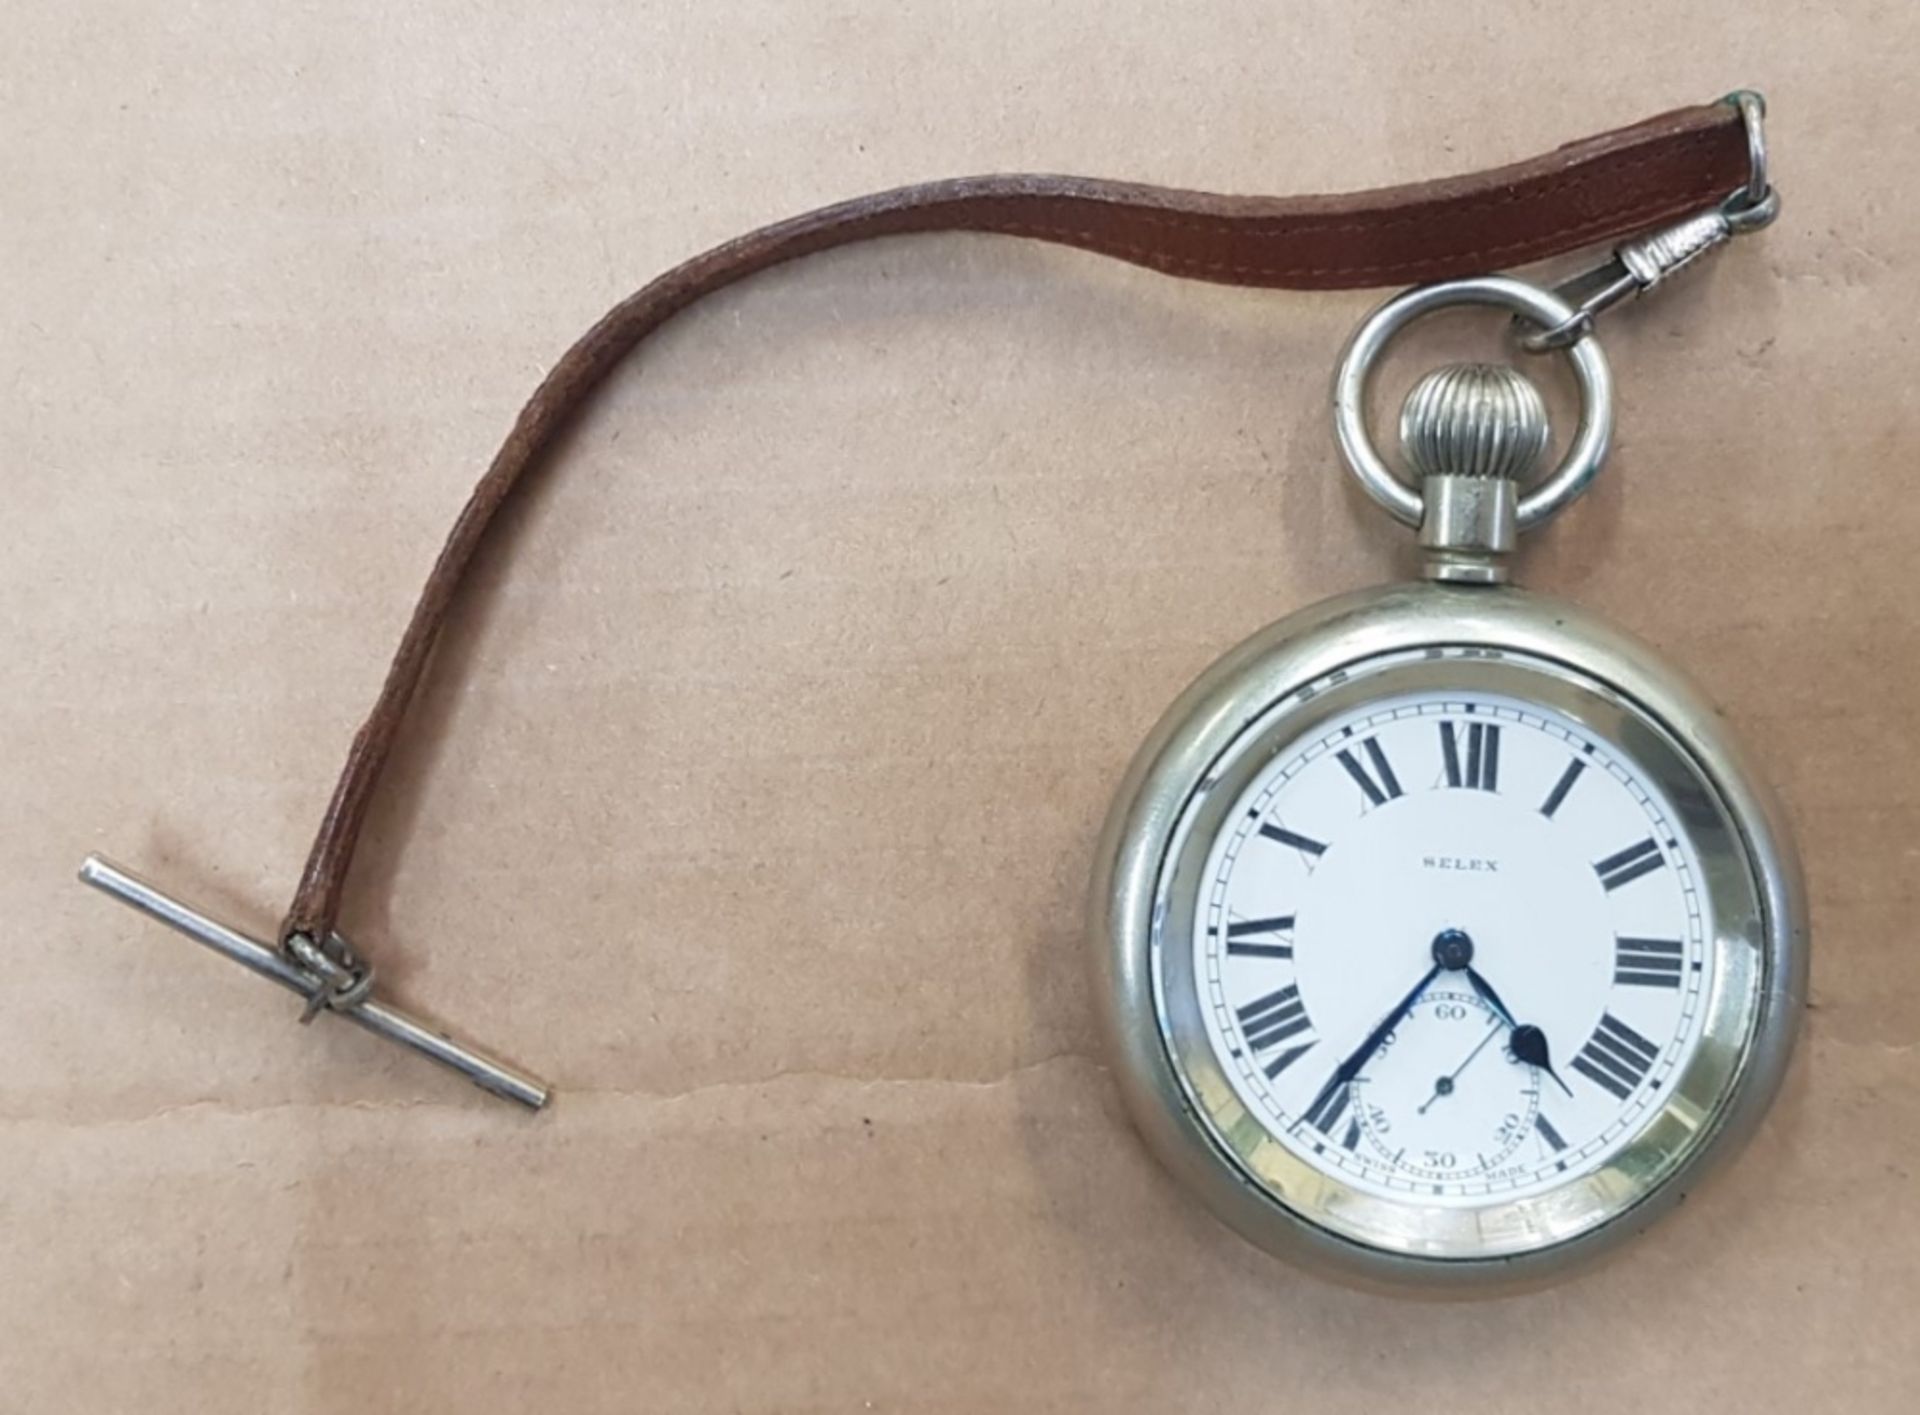 Selex LNER railway pocket watch with subsiduary seconds dial, Roman Numerals on a white dial,